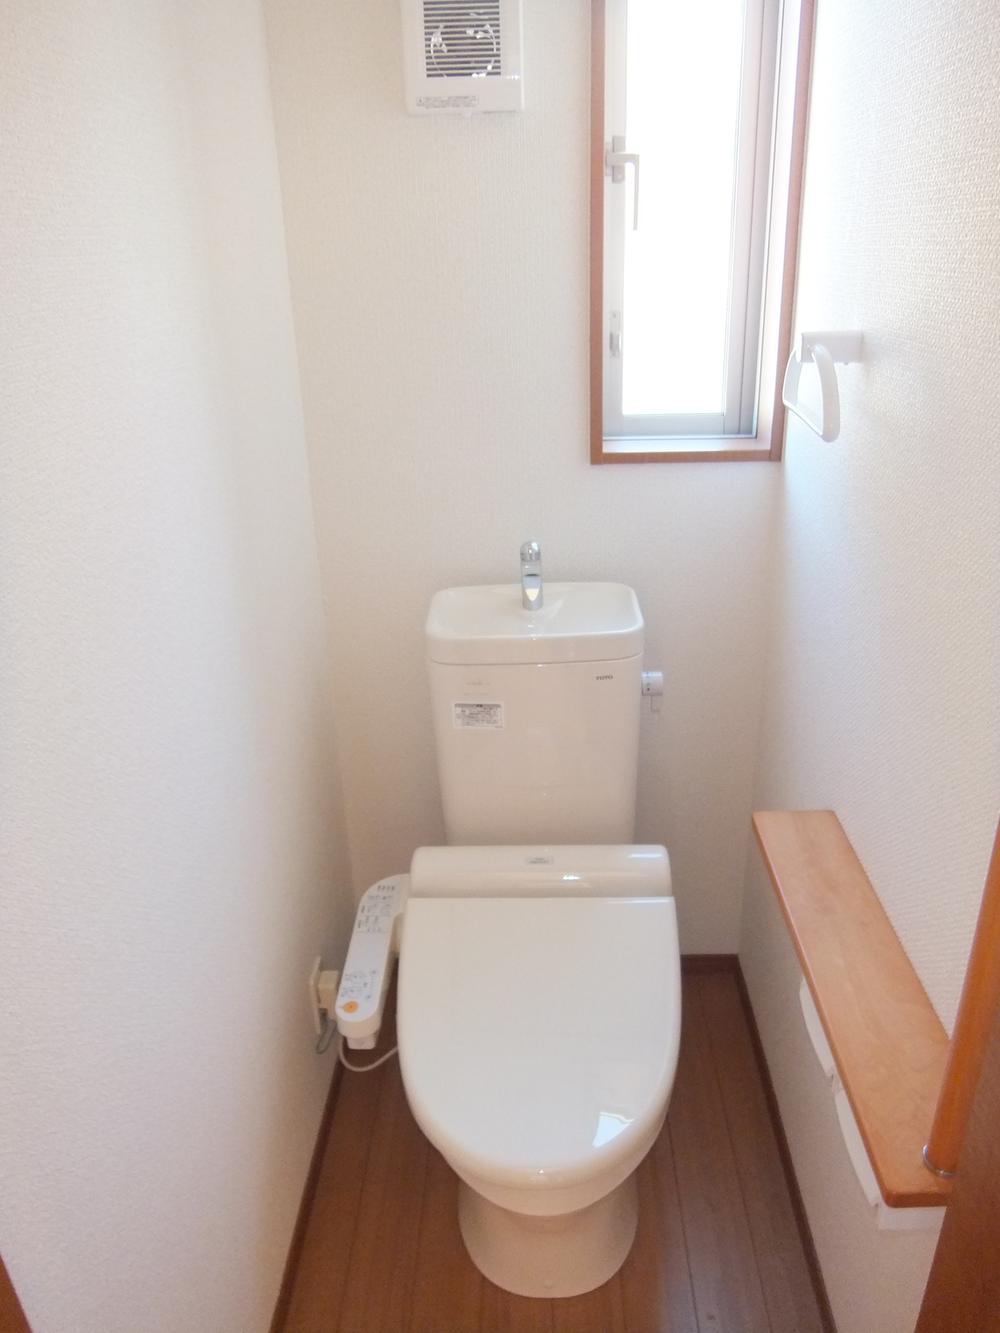 Toilet. Example of construction (with cleaning function warm toilet seat toilet)